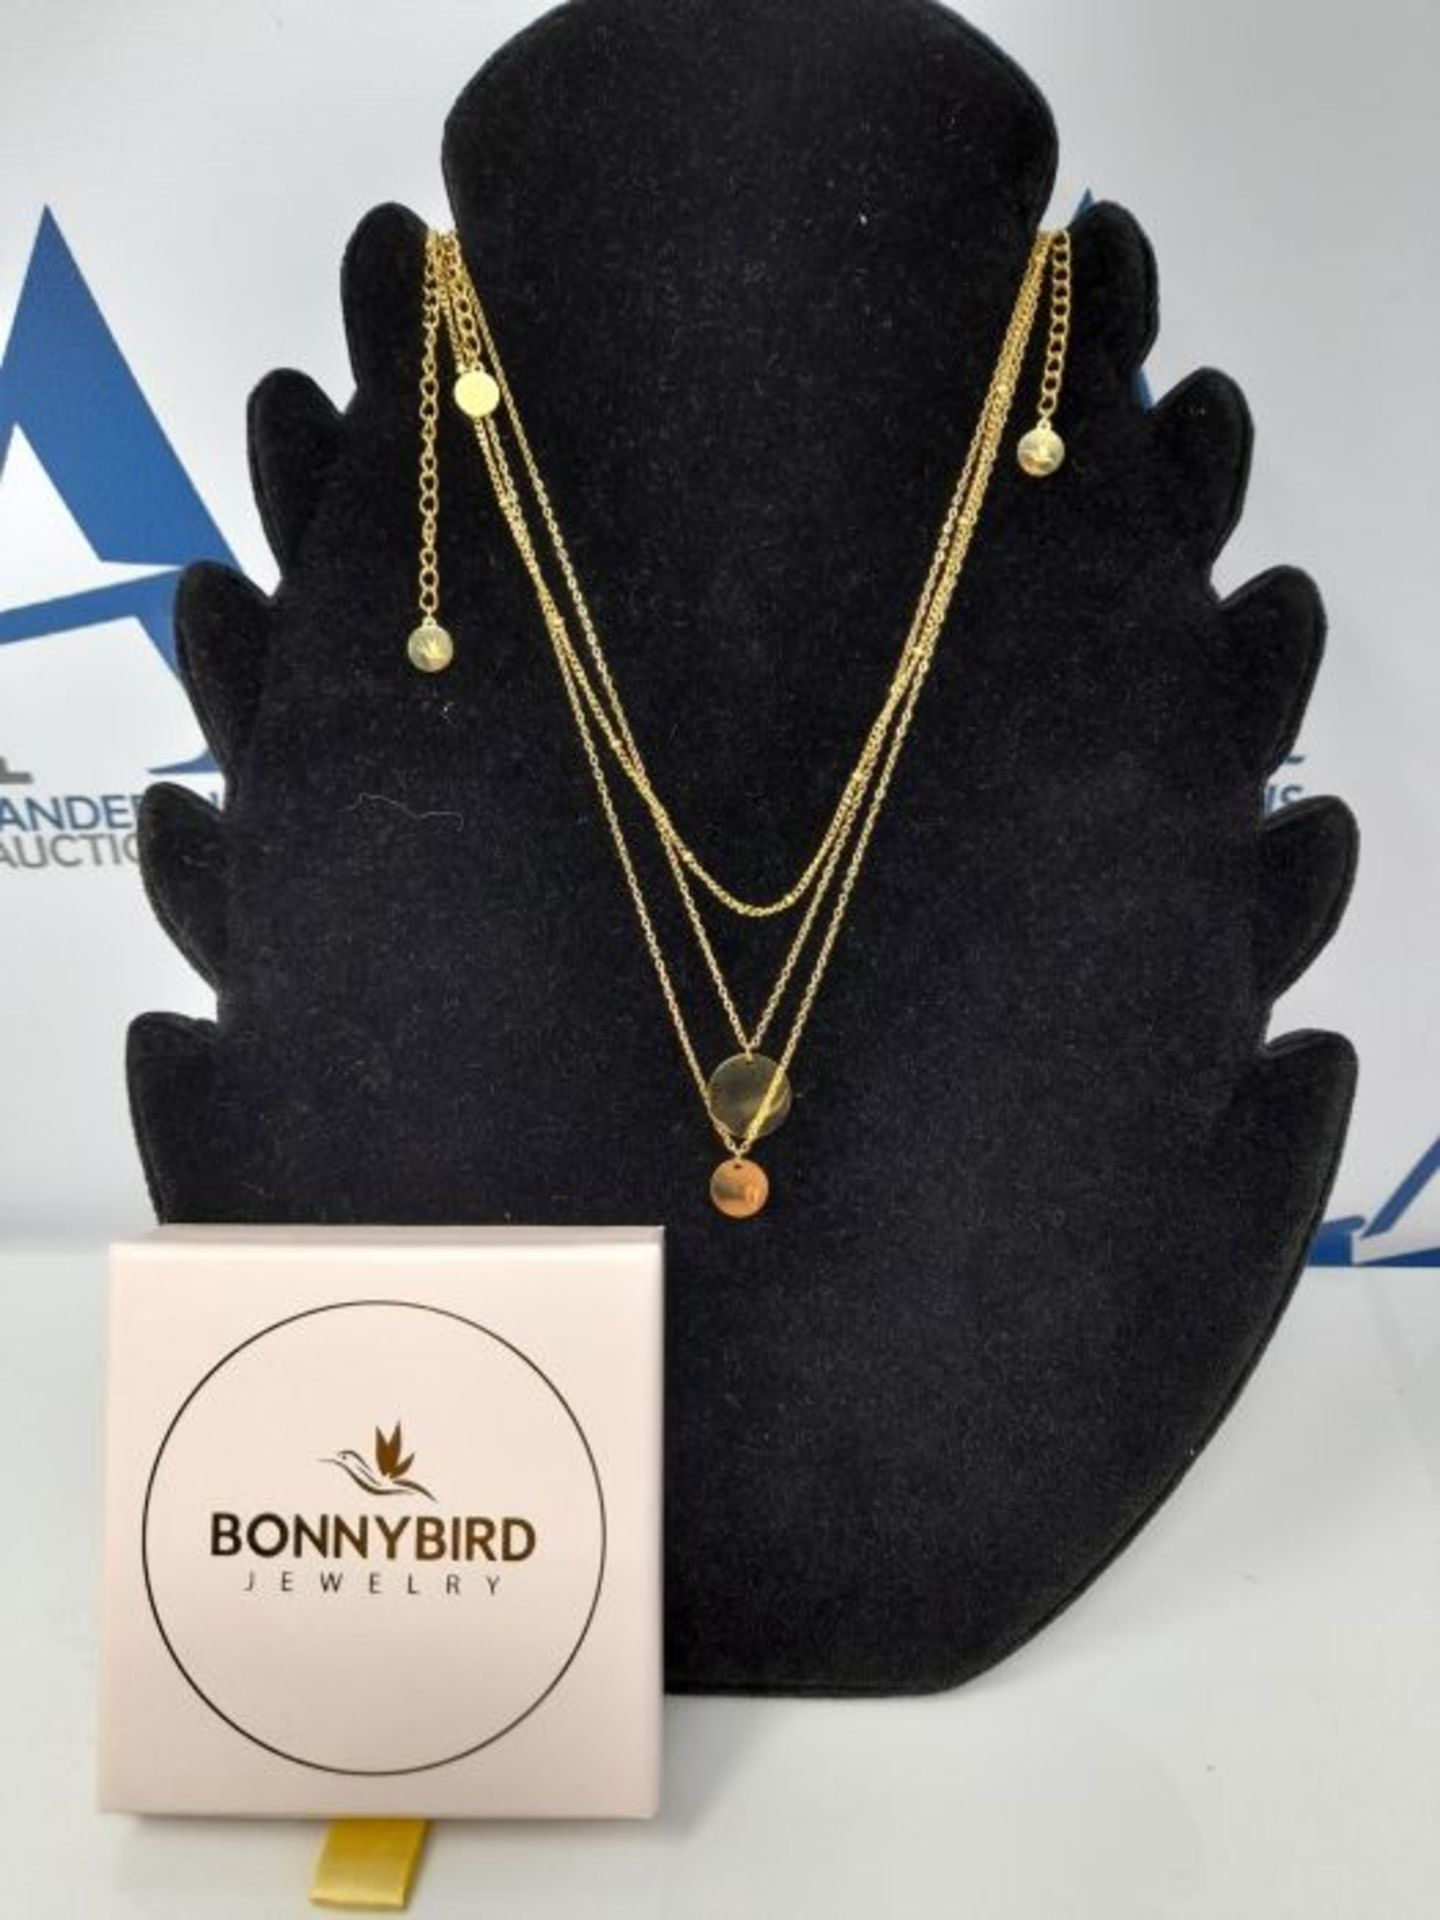 BONNYBIRD ® Women's necklaces with various pendants, high-quality stainless steel cha - Image 2 of 3